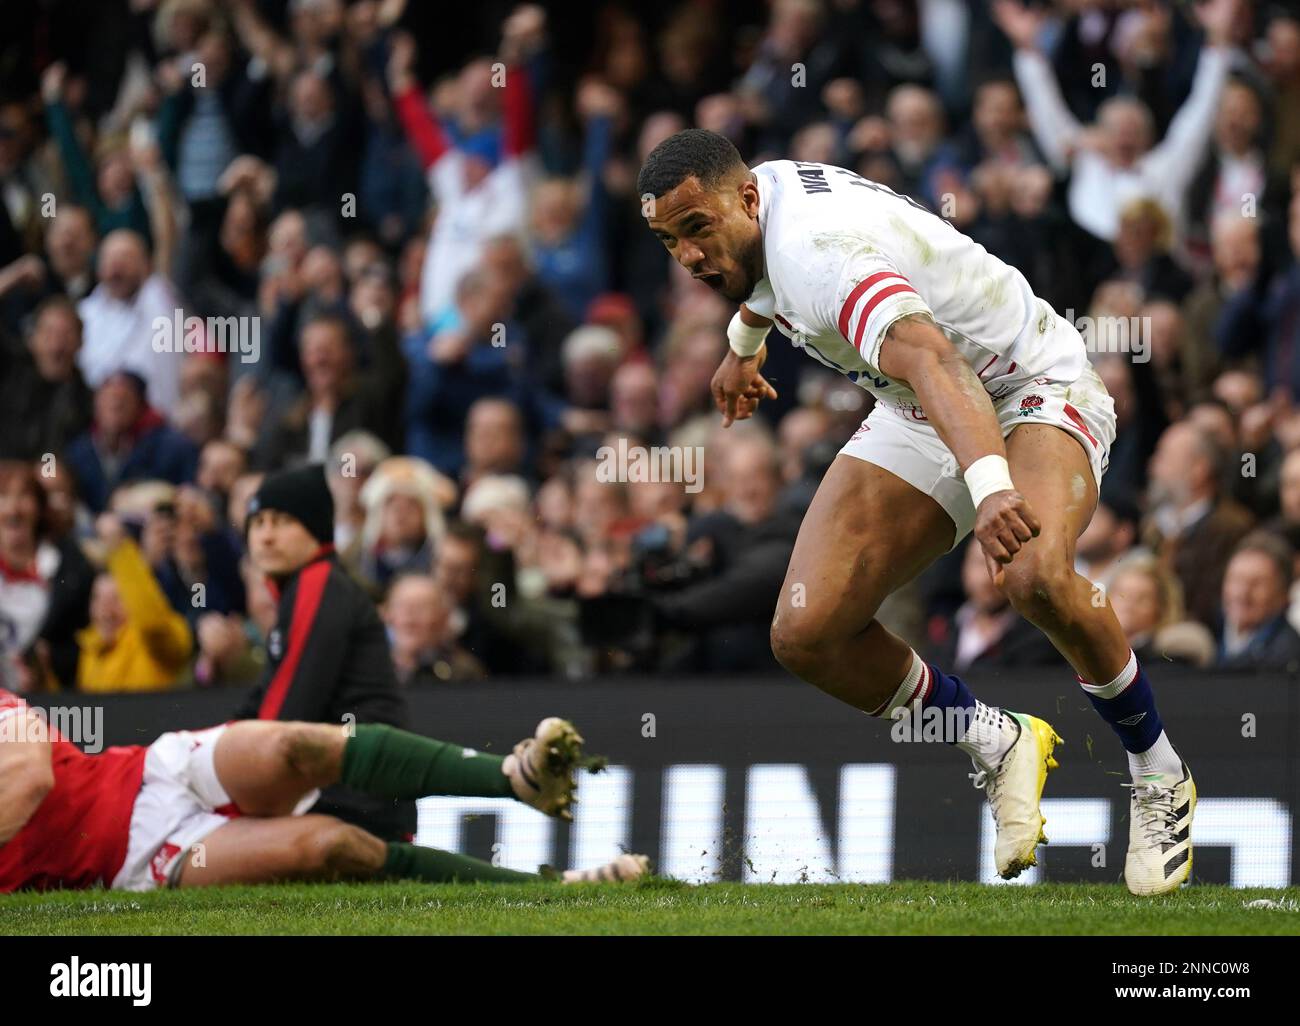 Englands Anthony Watson celebrates scoring their sides first try of the game during the Guinness Six Nations match at the Principality Stadium, Cardiff